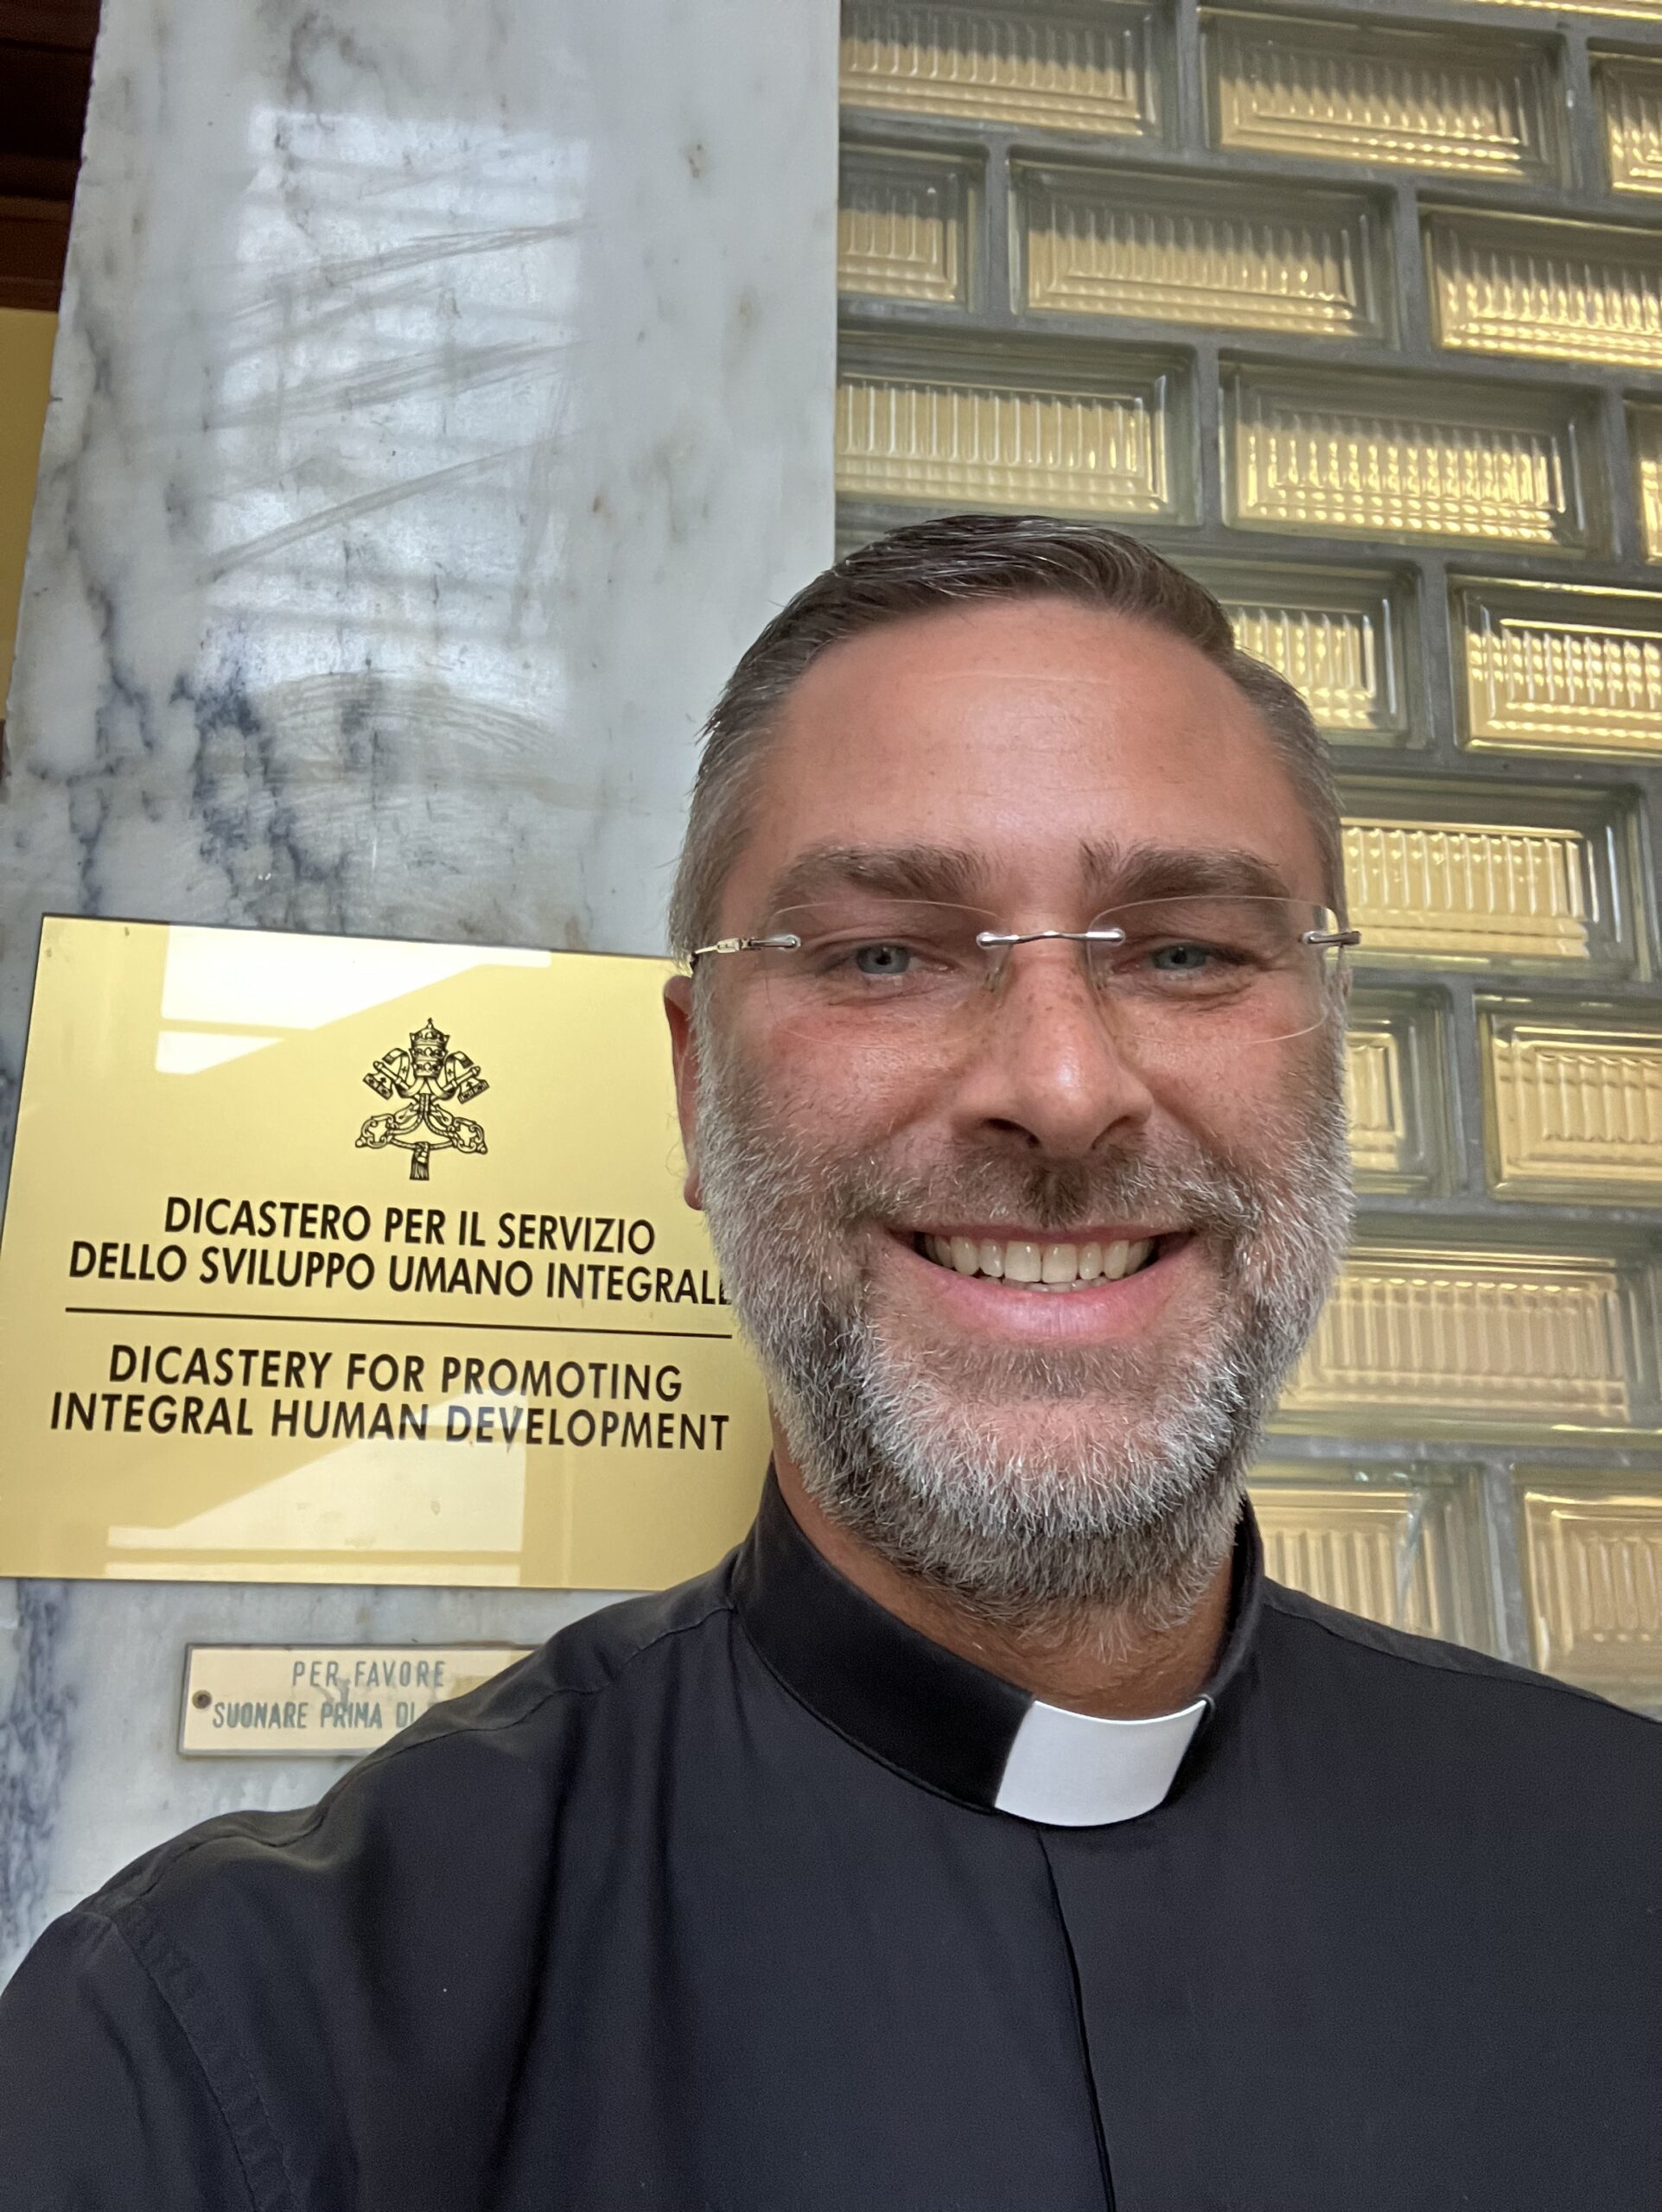 Fr. Shawn Conoboy's selfie on the first day of his assignment to the Vatican's Dicastery for Integral Human Development